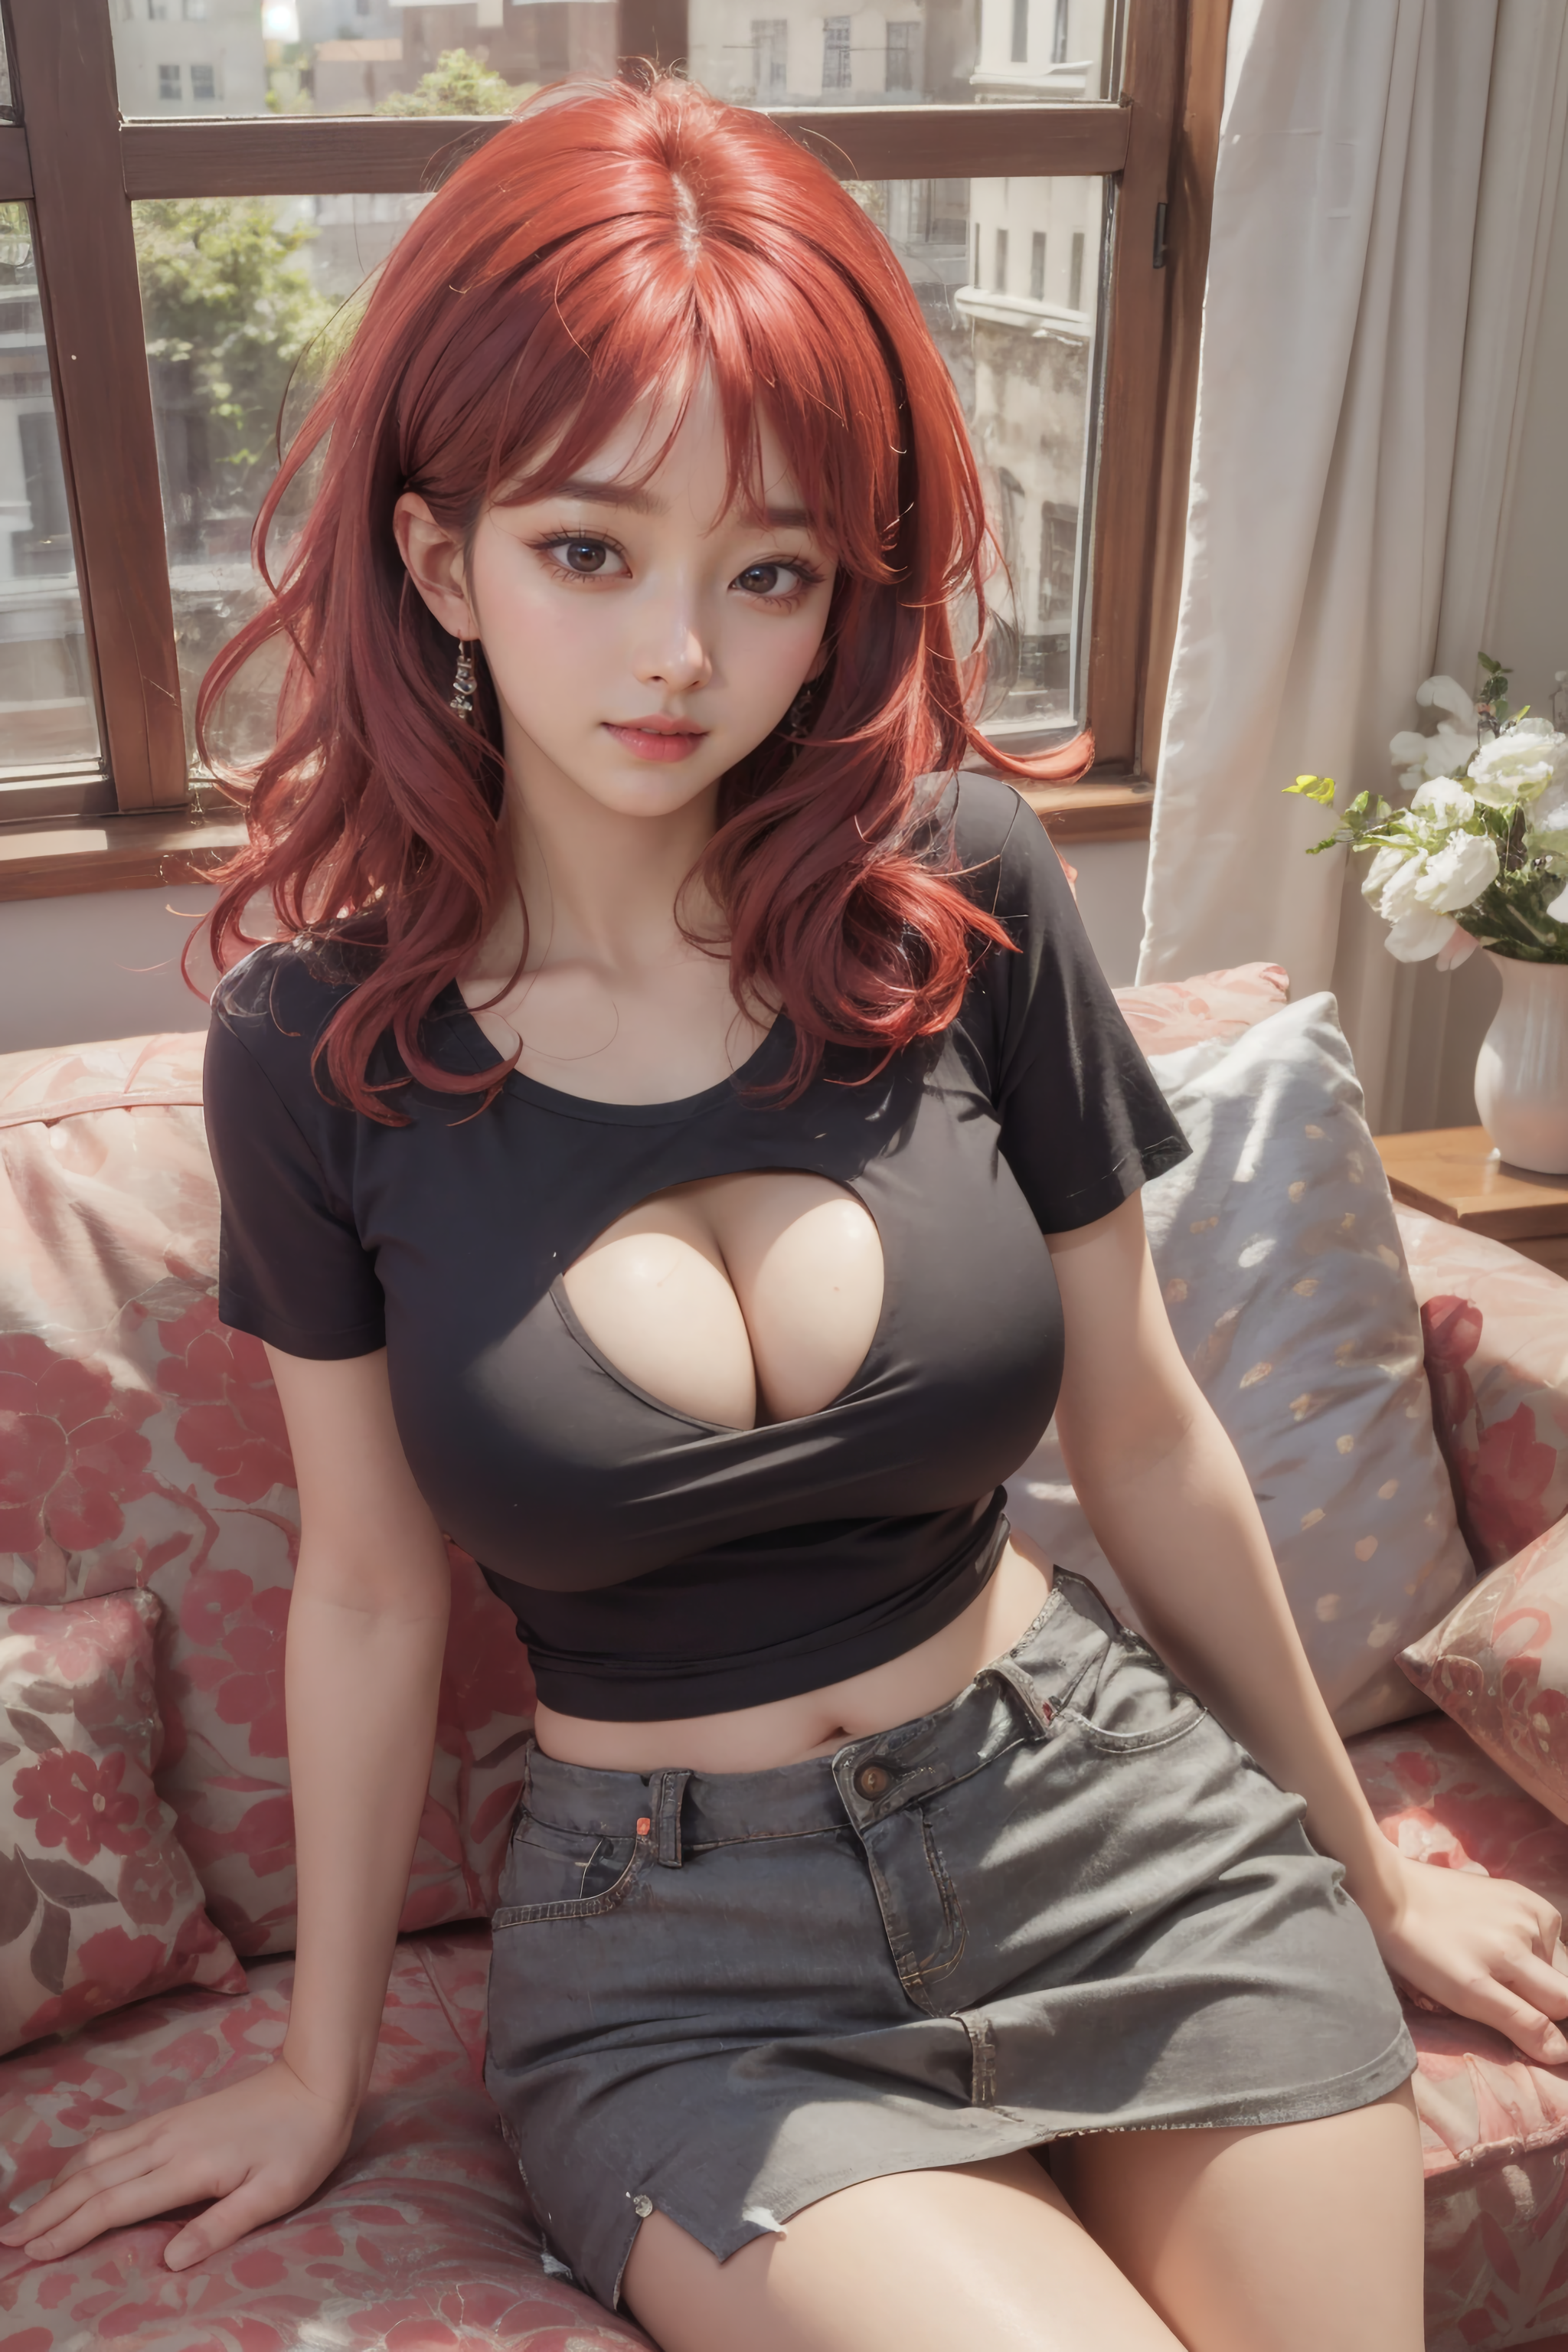 General 2048x3072 AI art women crop top shoulder length hair collarbone cleavage looking at viewer artwork digital art Asian portrait display big boobs sitting pillow couch window flowers earring belly button long hair